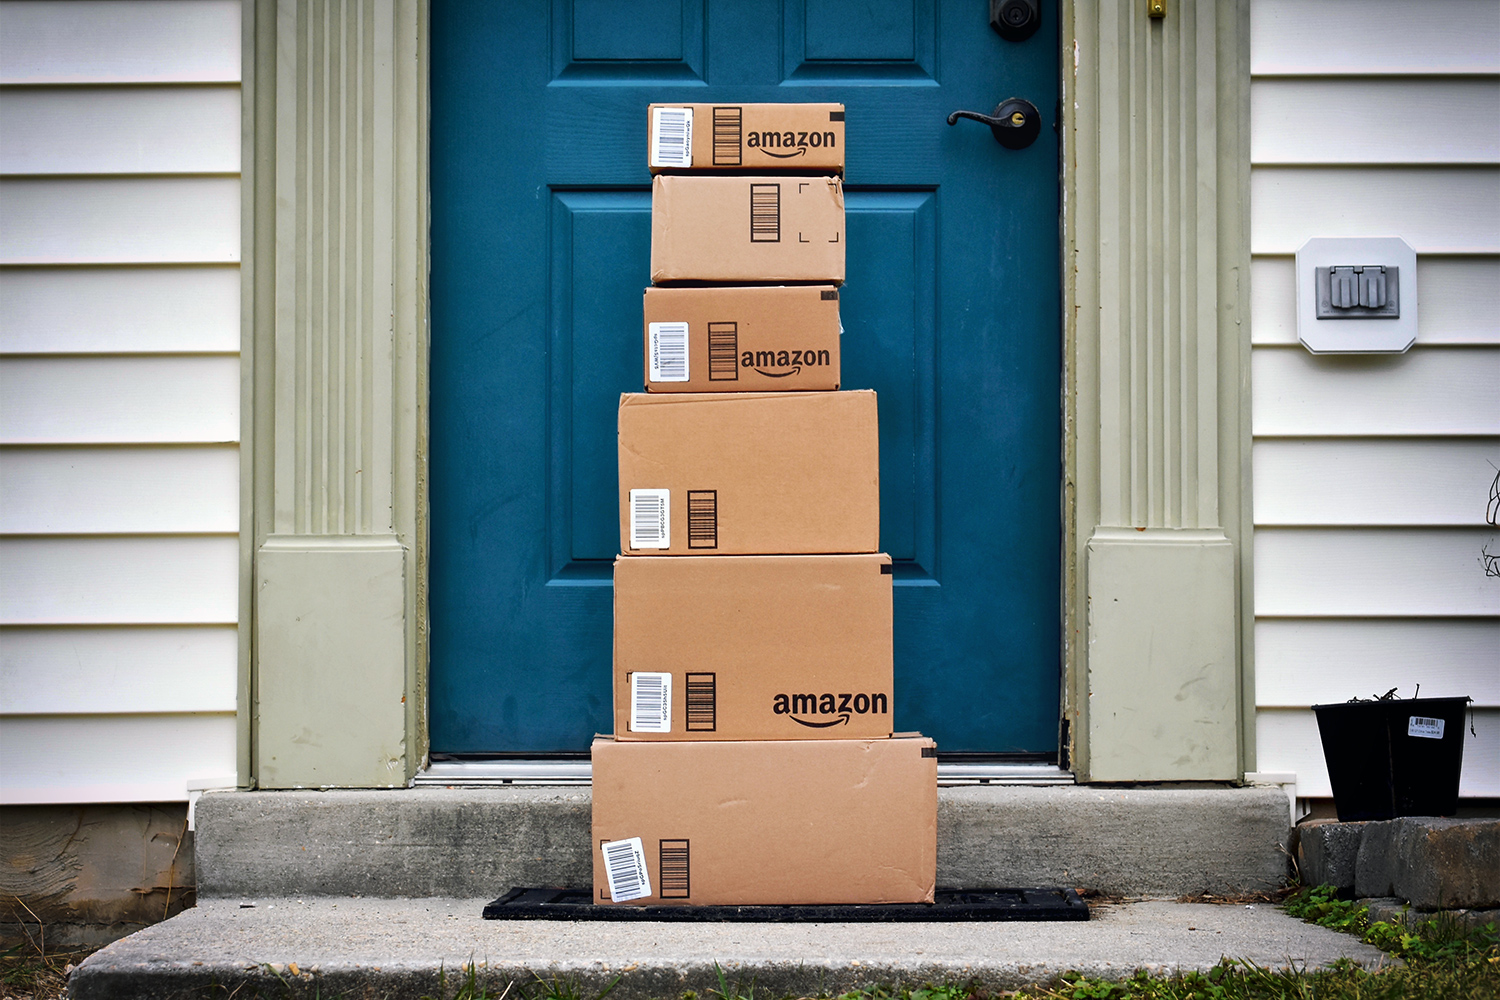 Amazon is offering Prime members $10 to pick up a delivery instead of having it delivered